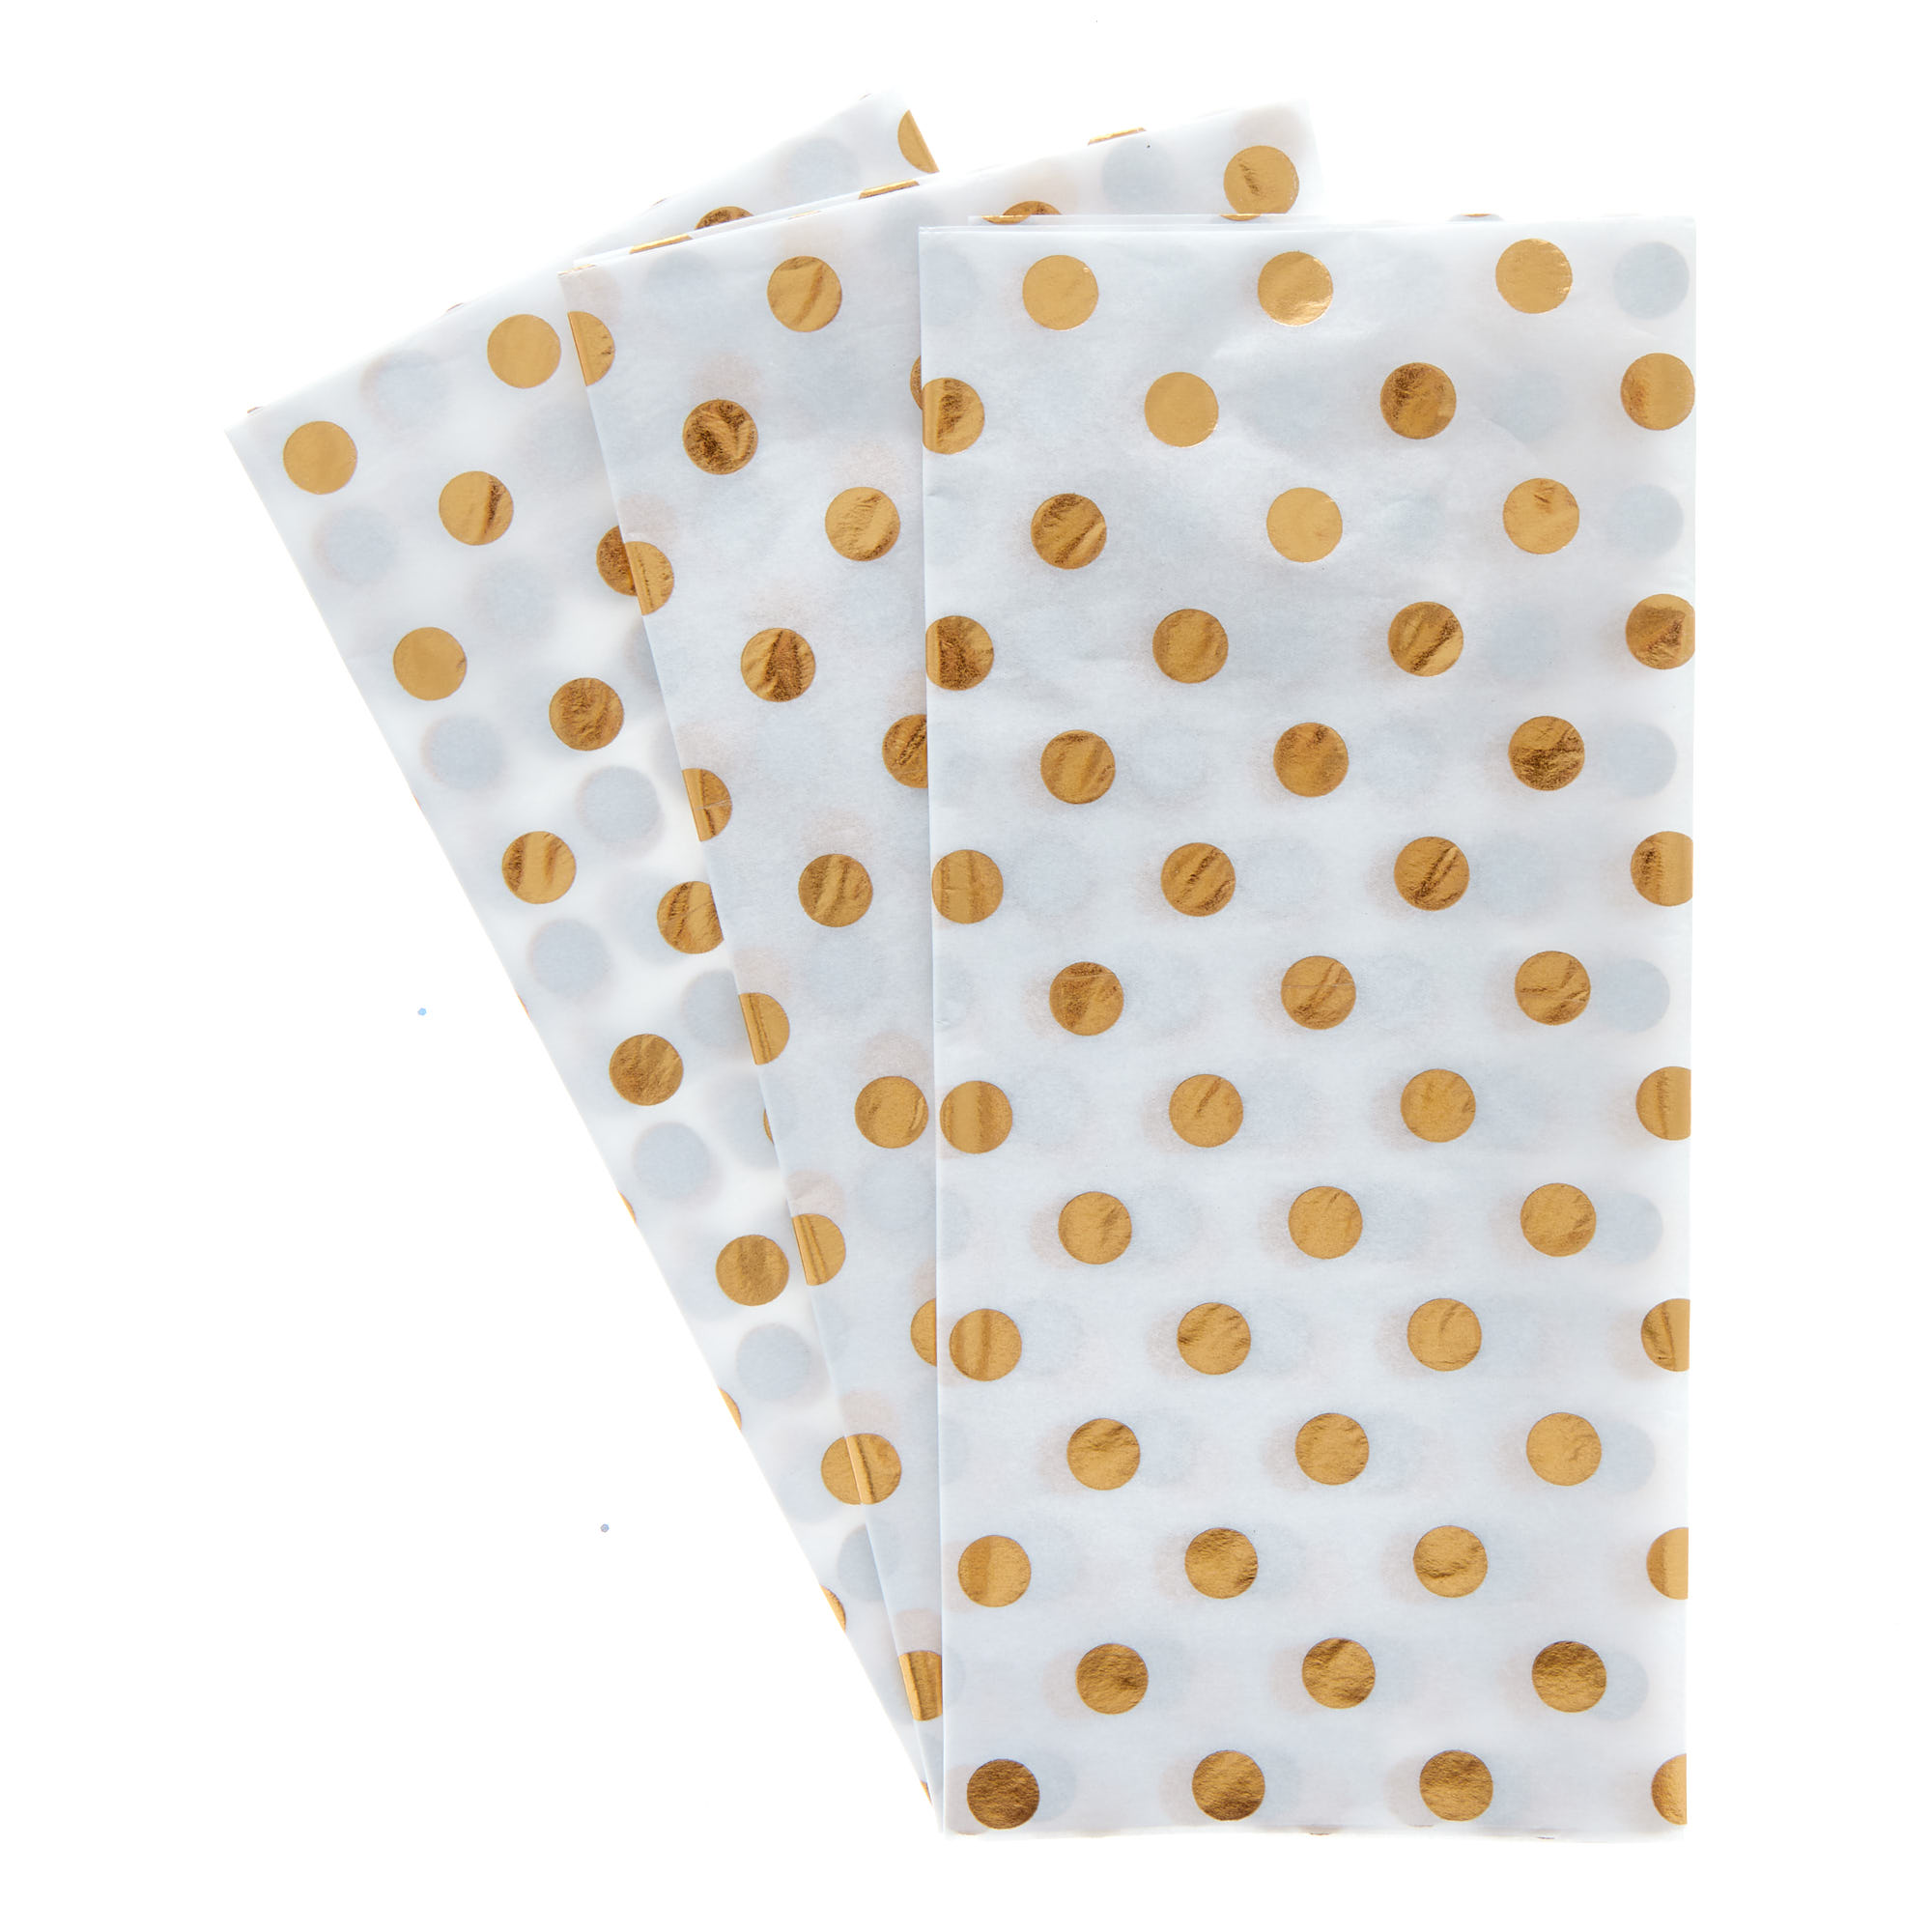 Buy Gold Foil Spots Tissue Paper - 3 Sheets for GBP 2.29 | Card Factory UK